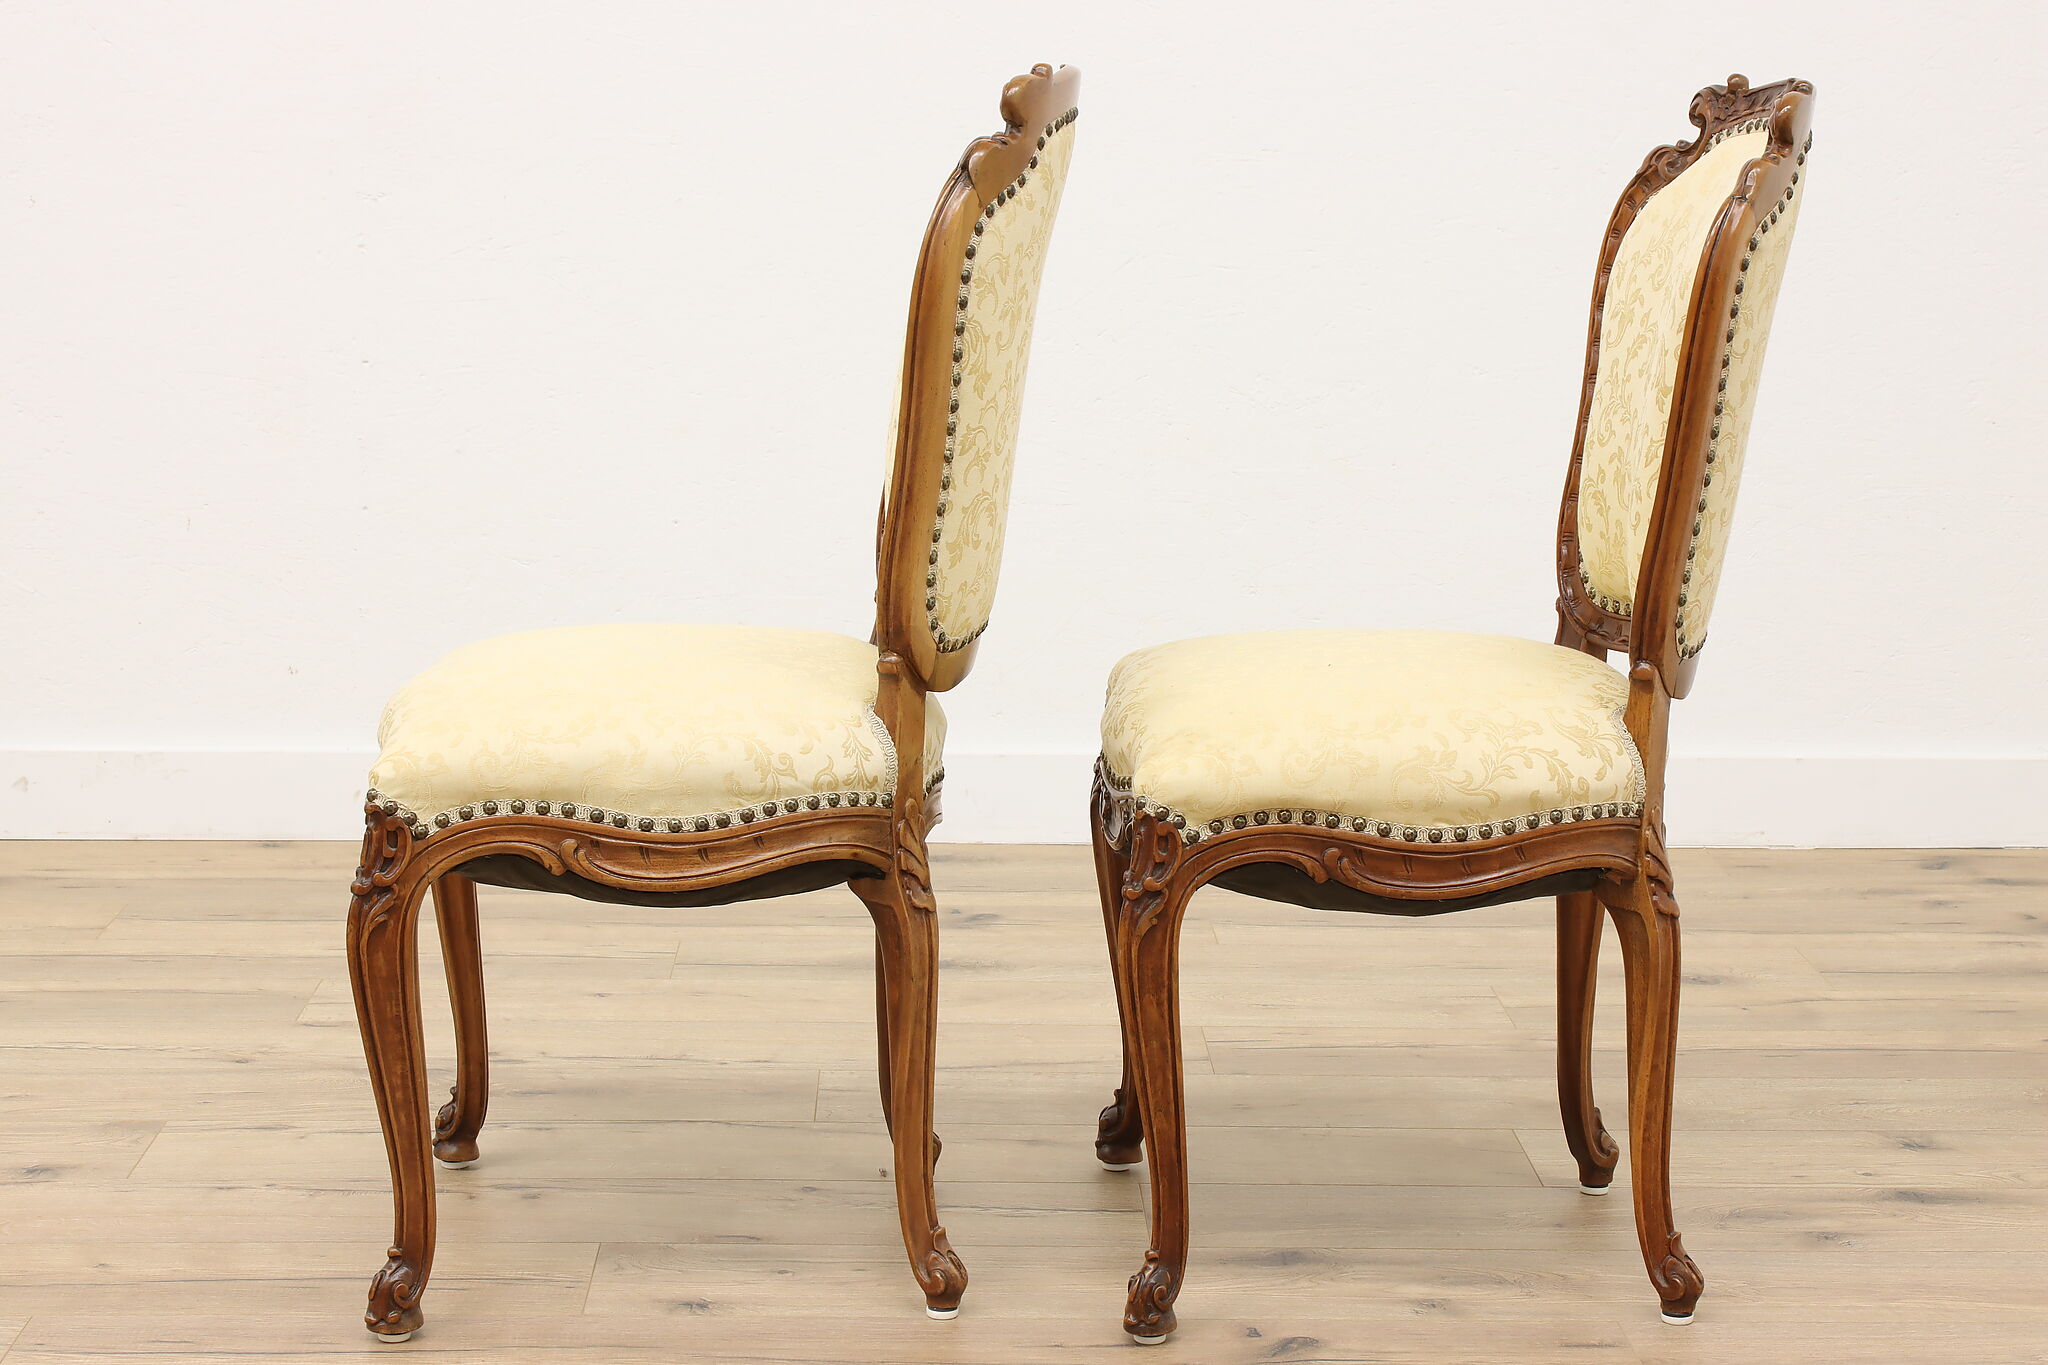 Set of Twelve French Louis XV Style Walnut Dining Chairs – Erin